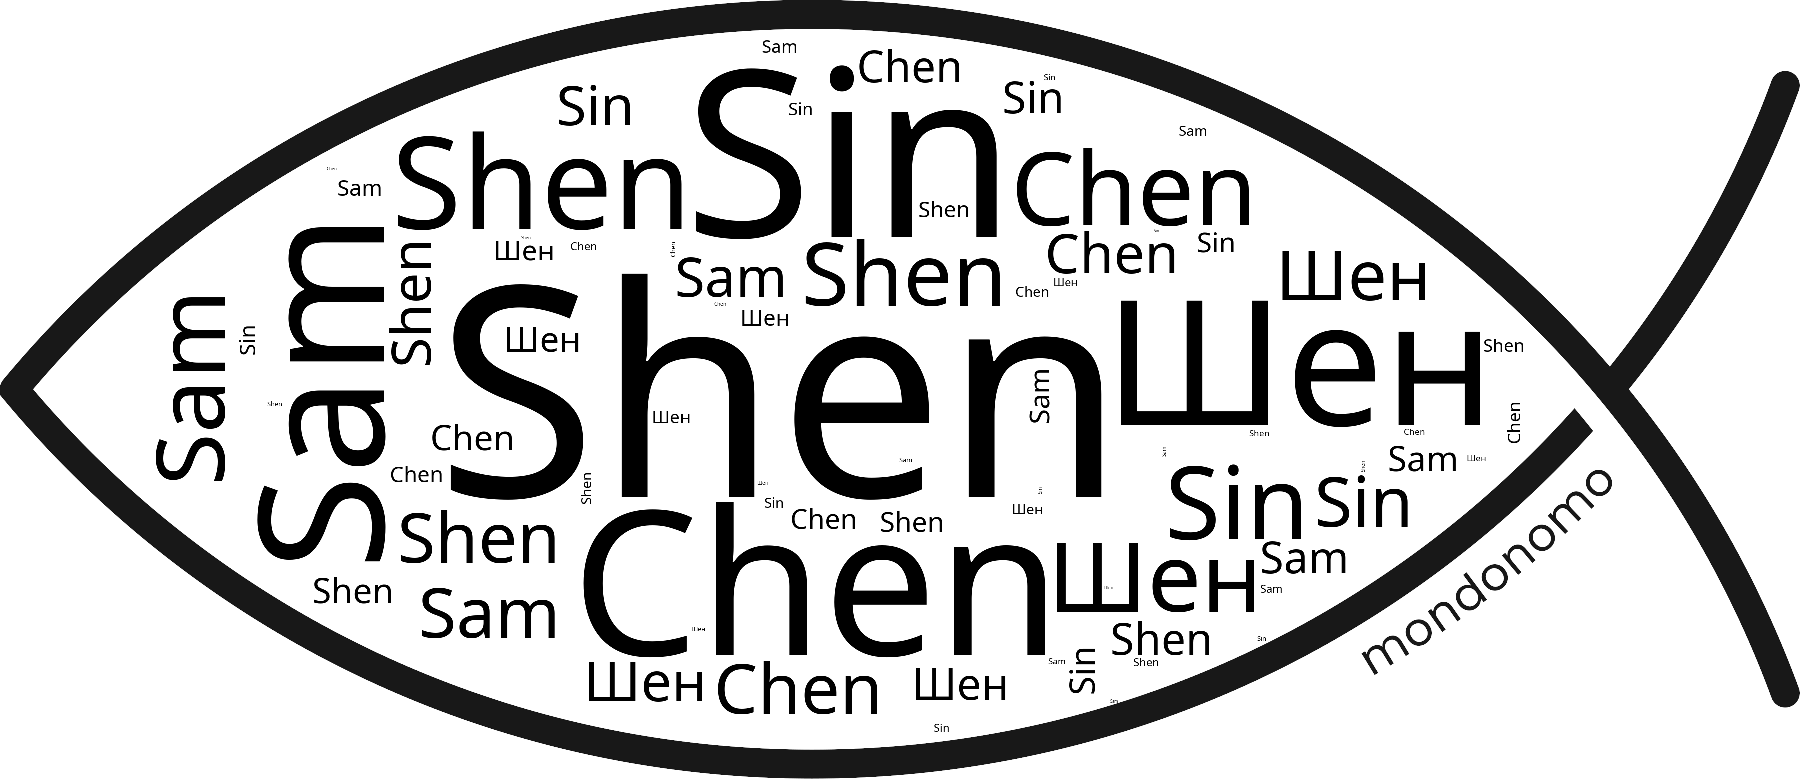 Name Shen in the world's Bibles